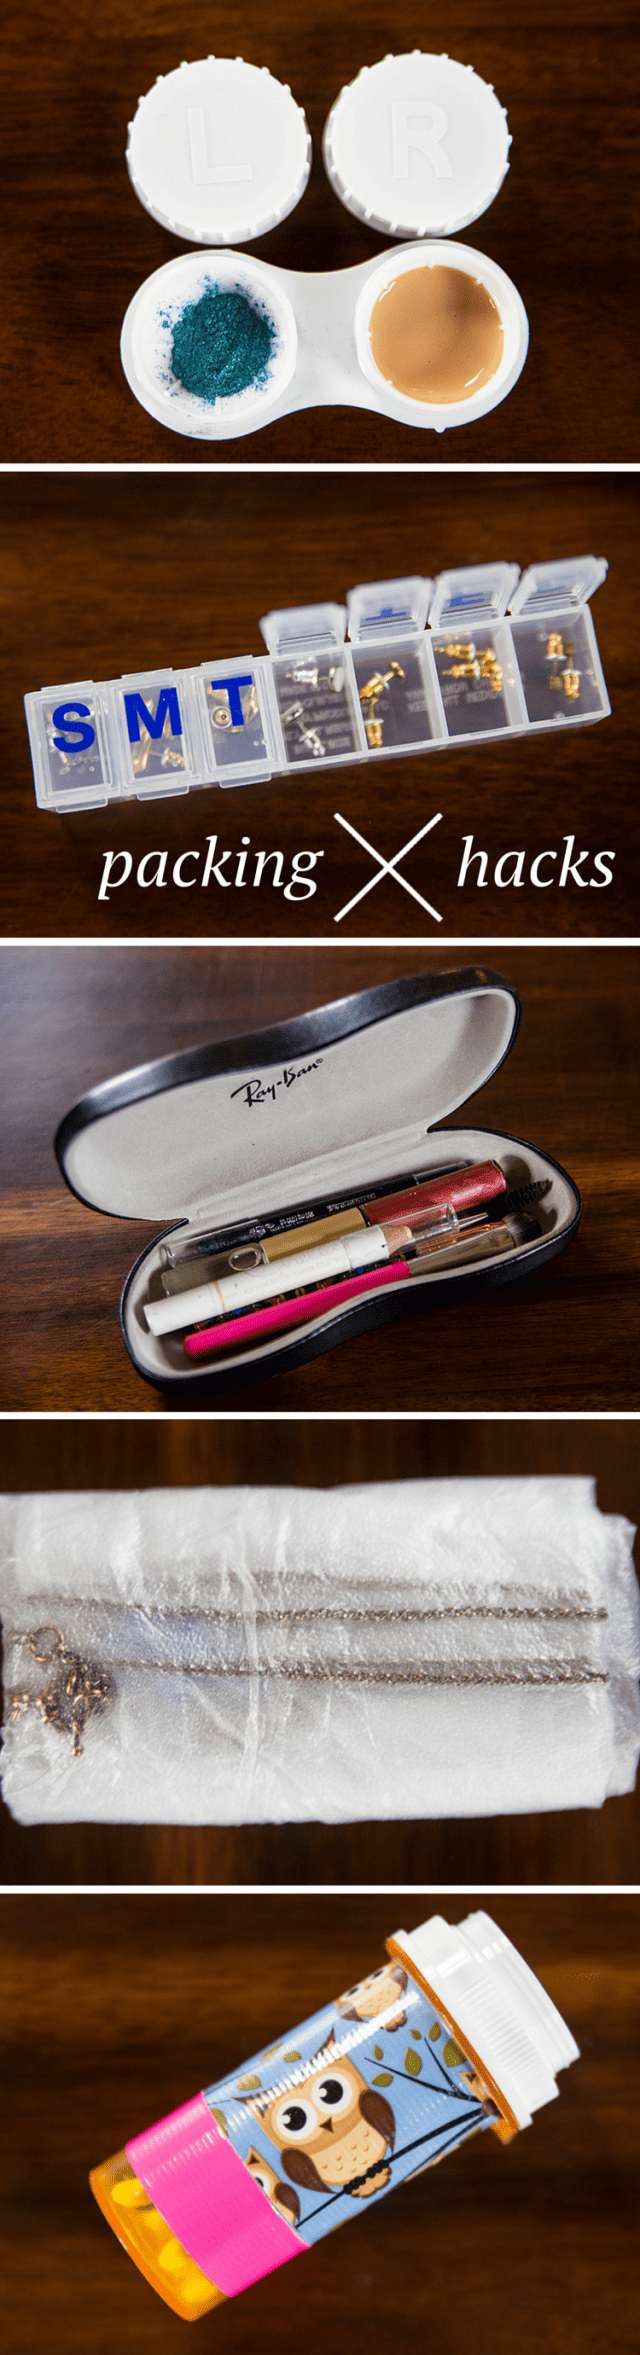 10 Genius Hacks for Packing Your Carry-On Suitcase - One thing that you may not know about me when it comes to travel is that I don’t like to check a bag. Even with my gold and silver status on multiple airlines (thanks to years of travel), I still prefer to zip past the airport ticket counter and head directly to the security line. The other benefits to only packing a carry-on is not having to wait on pieces in baggage claim to be delivered or the risk involved with those pieces being misplaced or even worse….lost forever. So, if I can swing it, I’ll go with just a carry-on 90% of the time. I will admit that taking a carry-on does make packing a bit more challenging, but after years of experience, I have a system down pat. Today I am sharing a few of my favorite carry-on hacks!